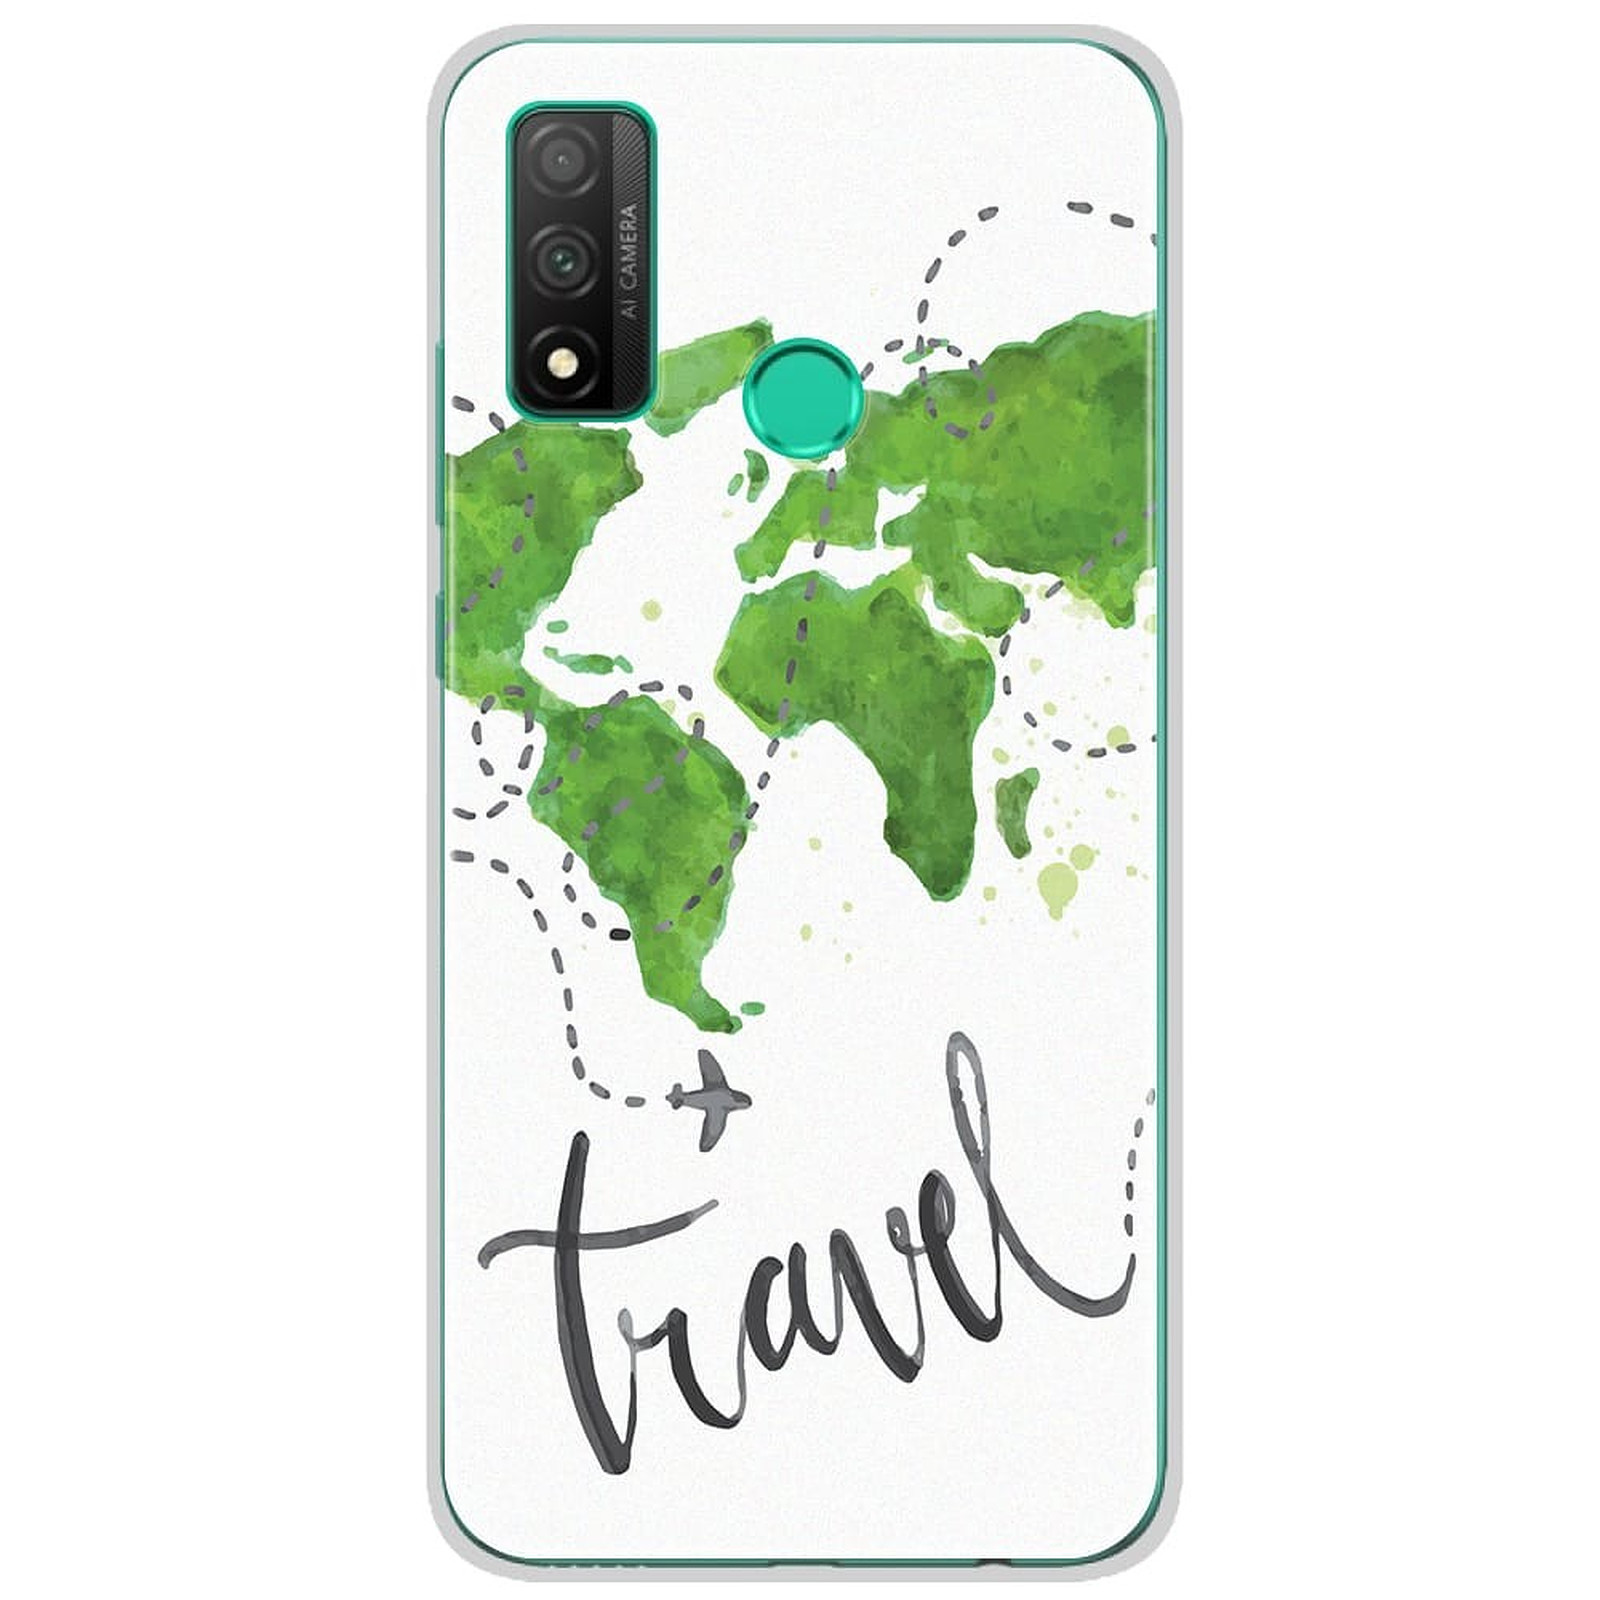 1001 Coques Coque silicone gel Huawei P Smart 2020 motif Map Travel - Coque telephone 1001Coques